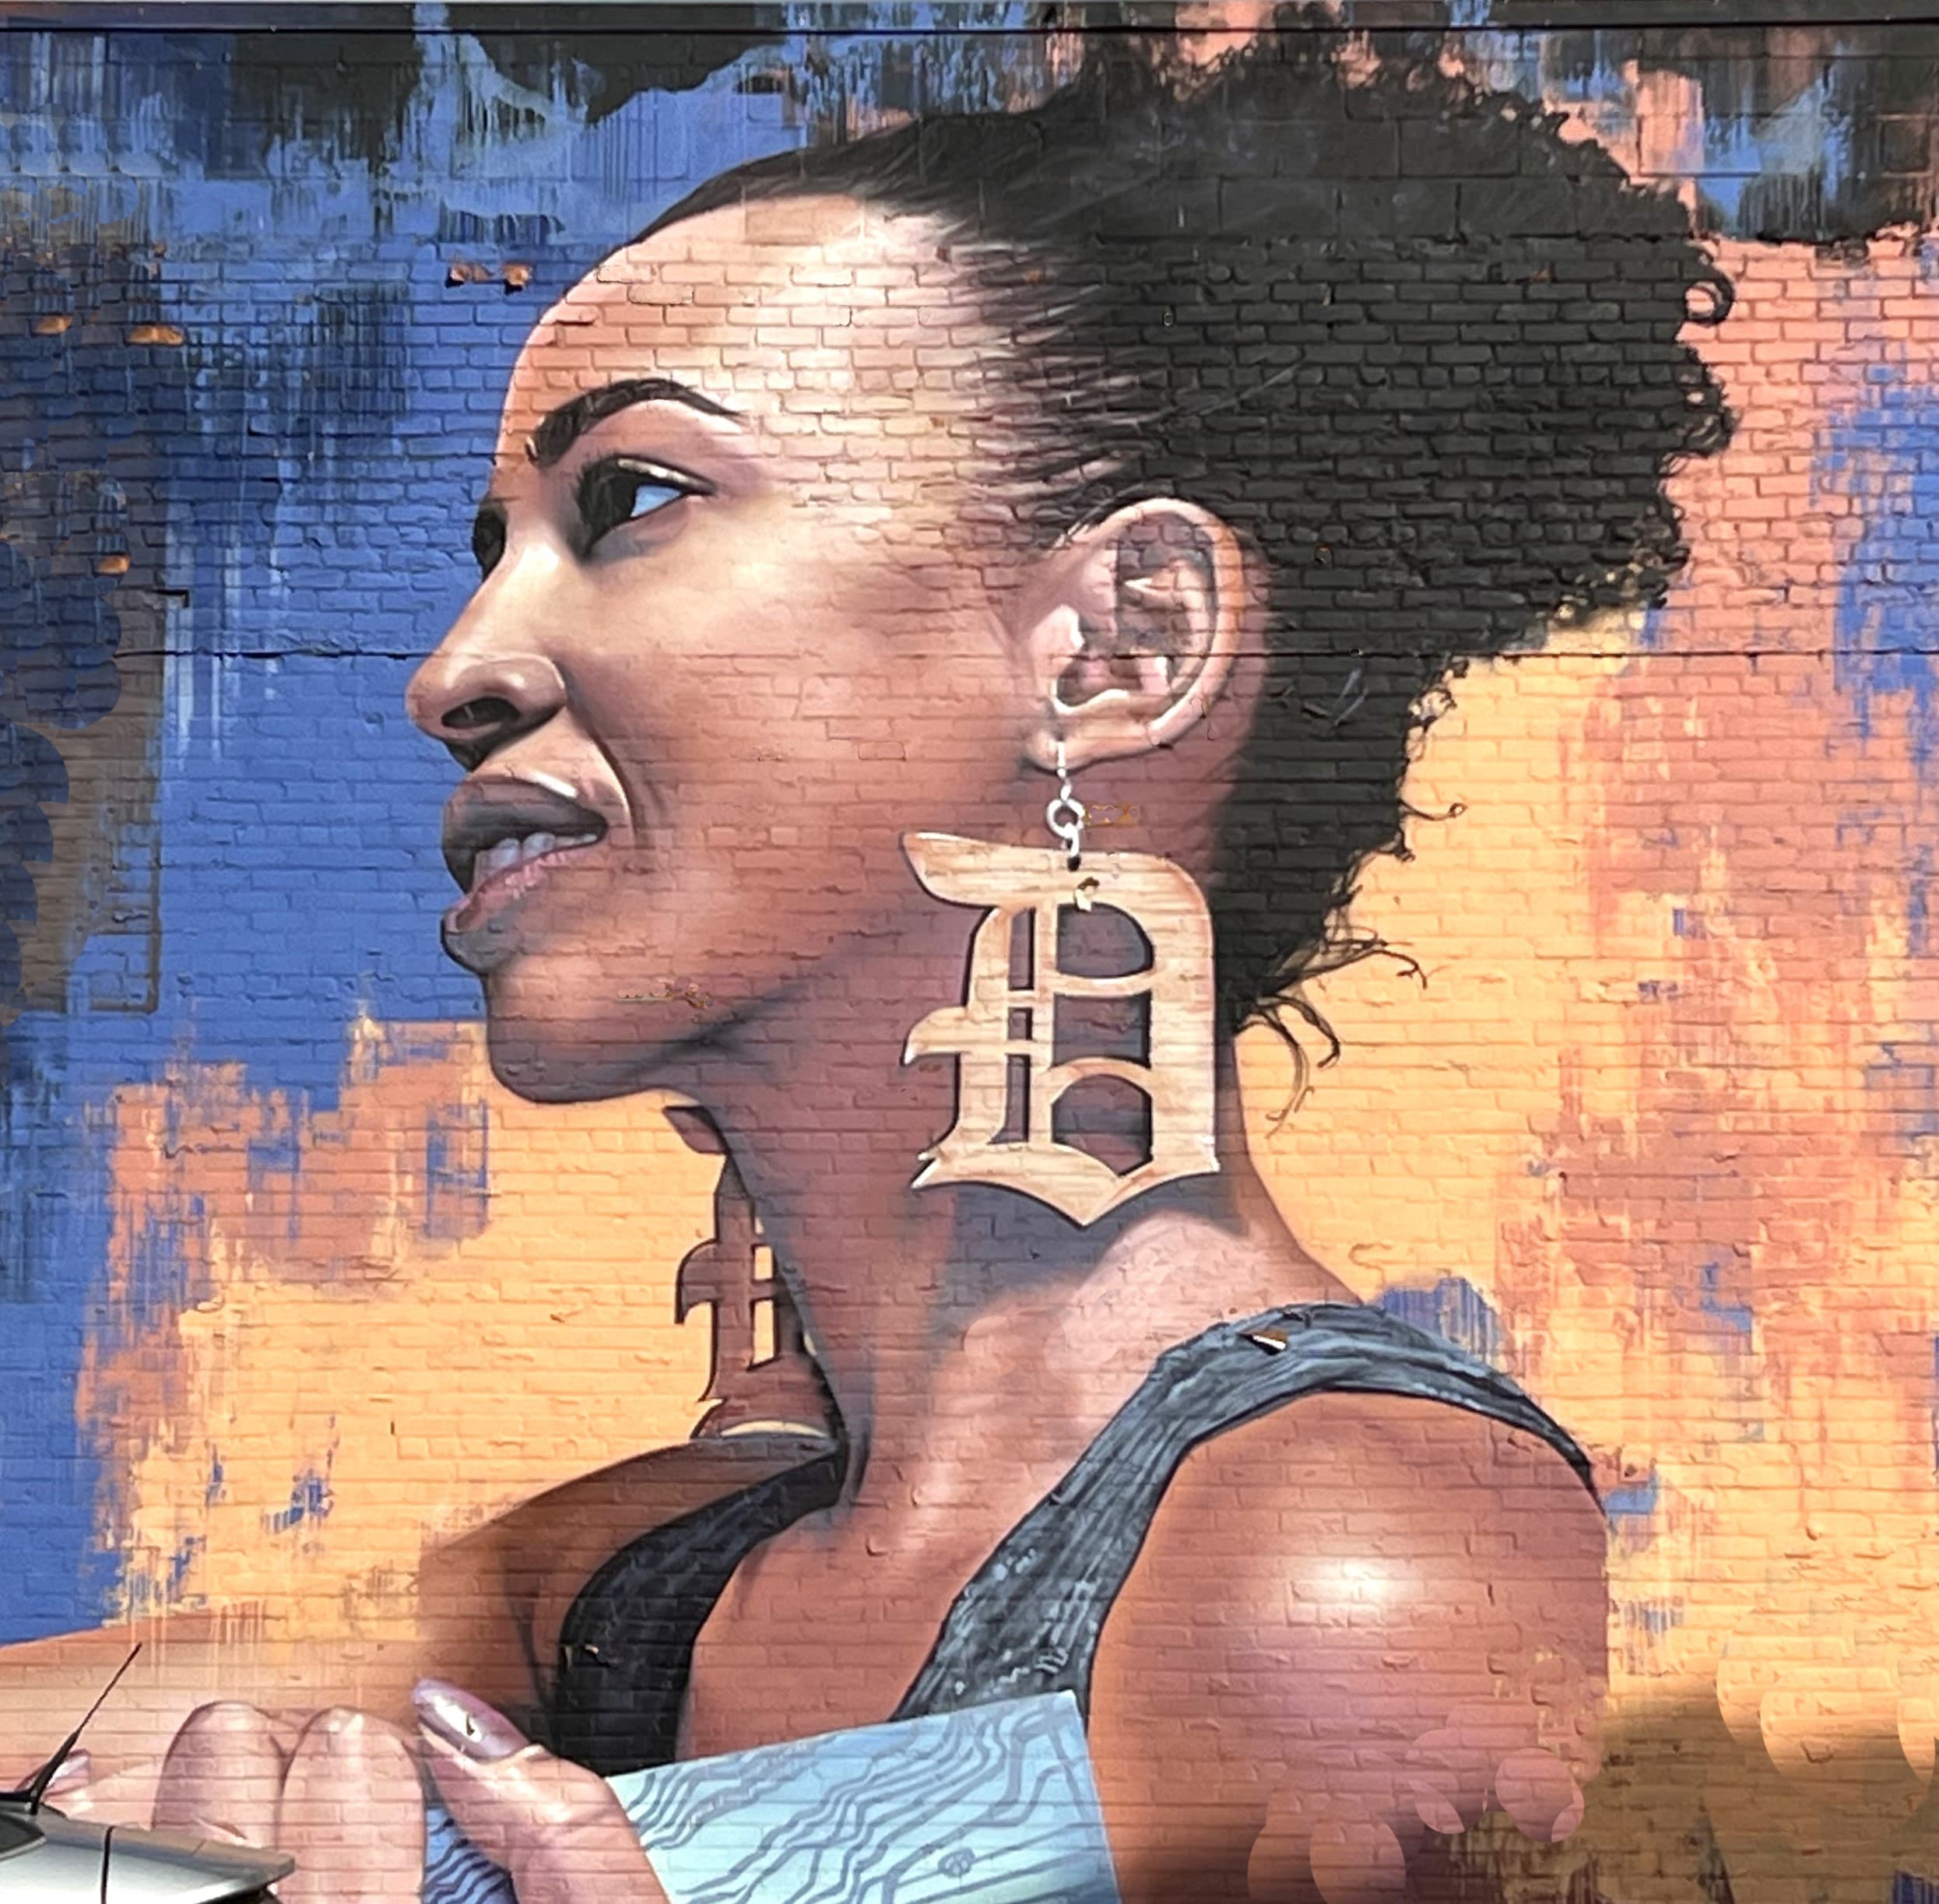 Detroit Eastern Market mural by artist Richard Wilson includes an image of a young woman wearing large gold earrings in the iconic Old English D-style.